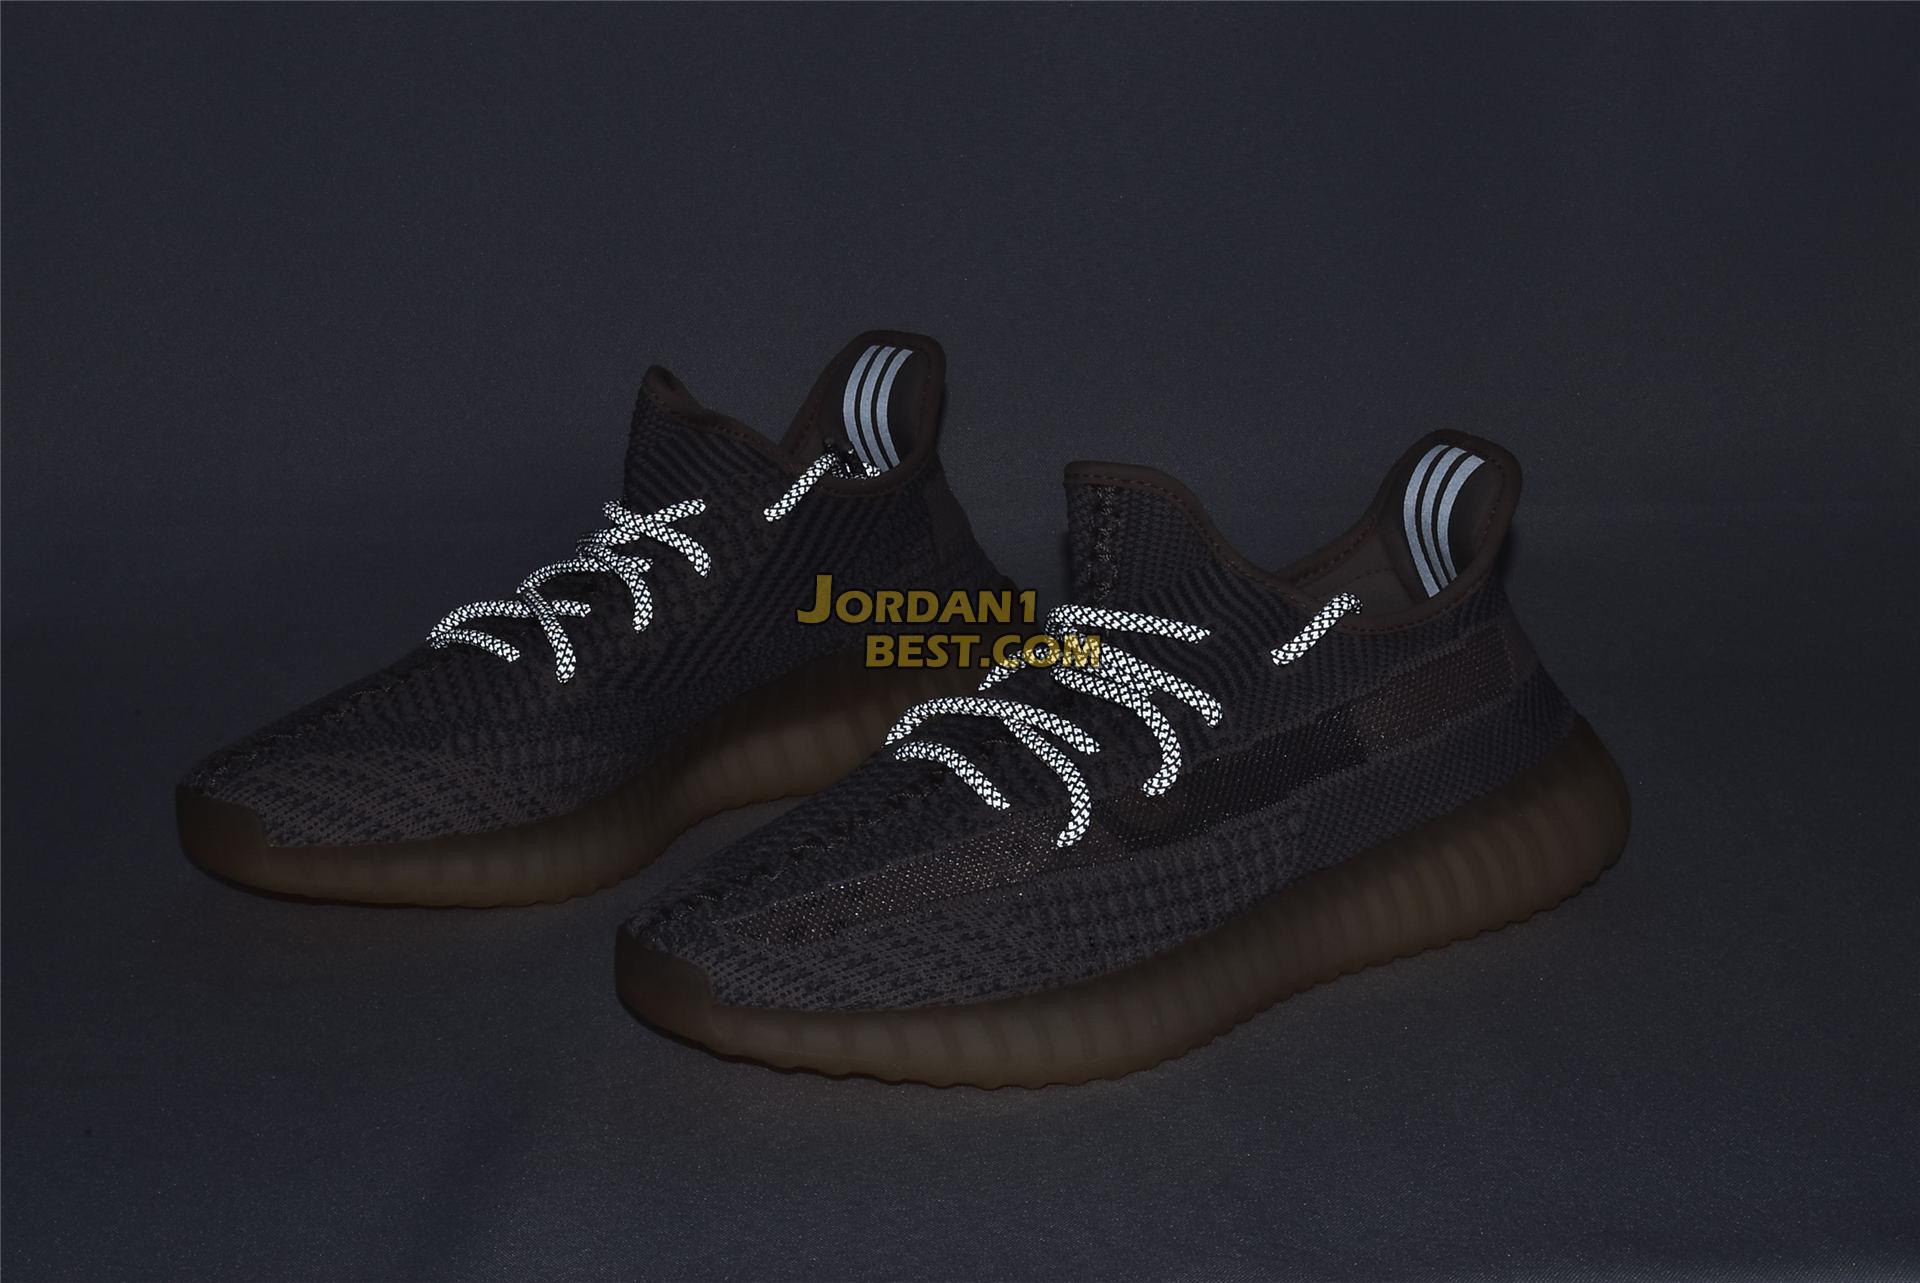 Adidas Yeezy Boost 350 V2 "Synth Non-Reflective" FV5578